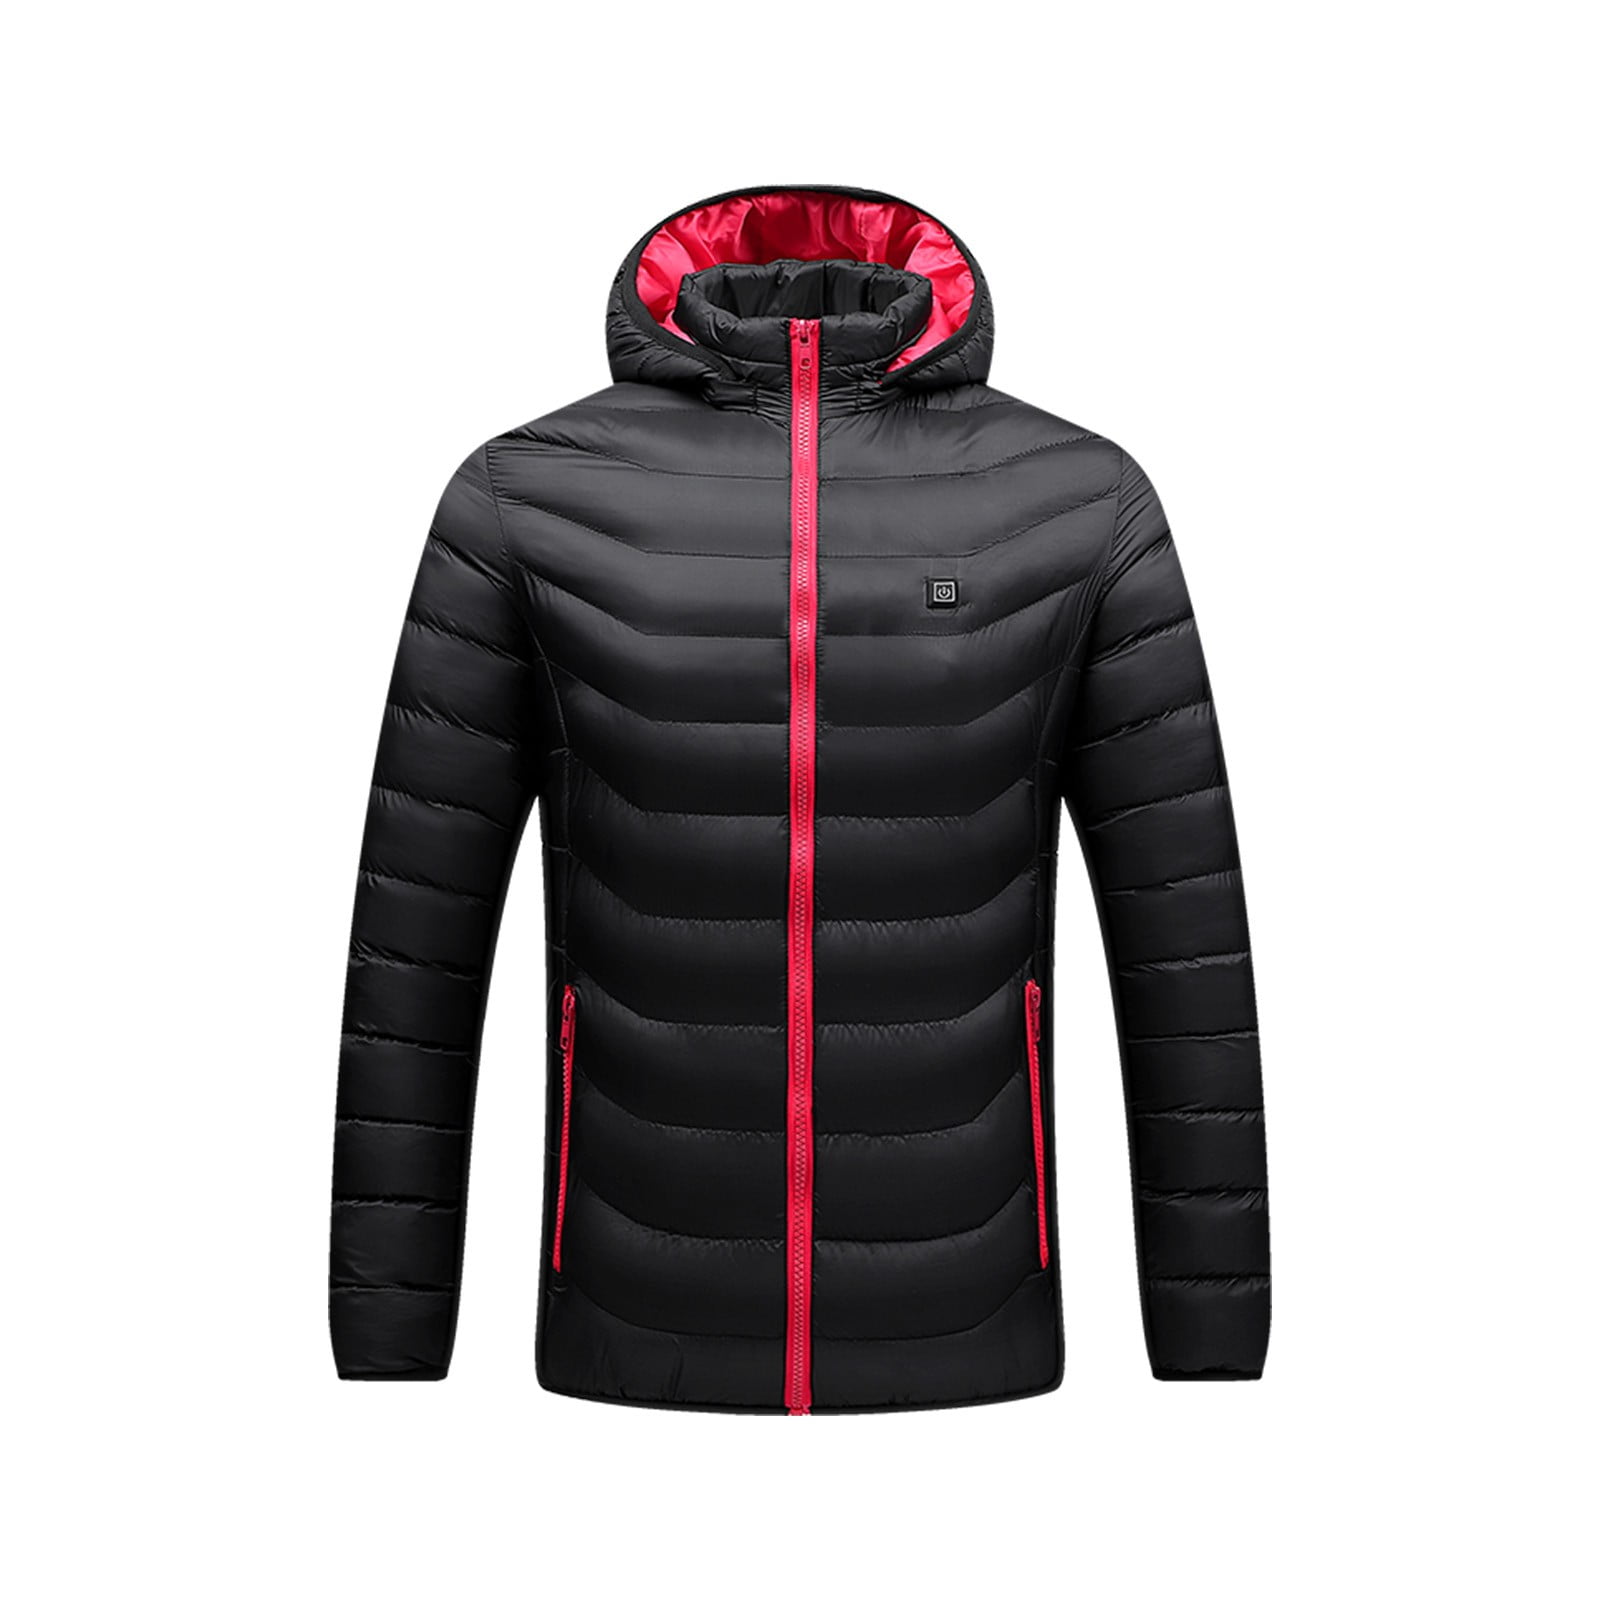 M, Black Mens Heated Jacket Carbon Fiber Electric Heating Clothing Front and Back Heat Zones Waterproof Wind Resistant and Anti-fouling Heated Jacket 